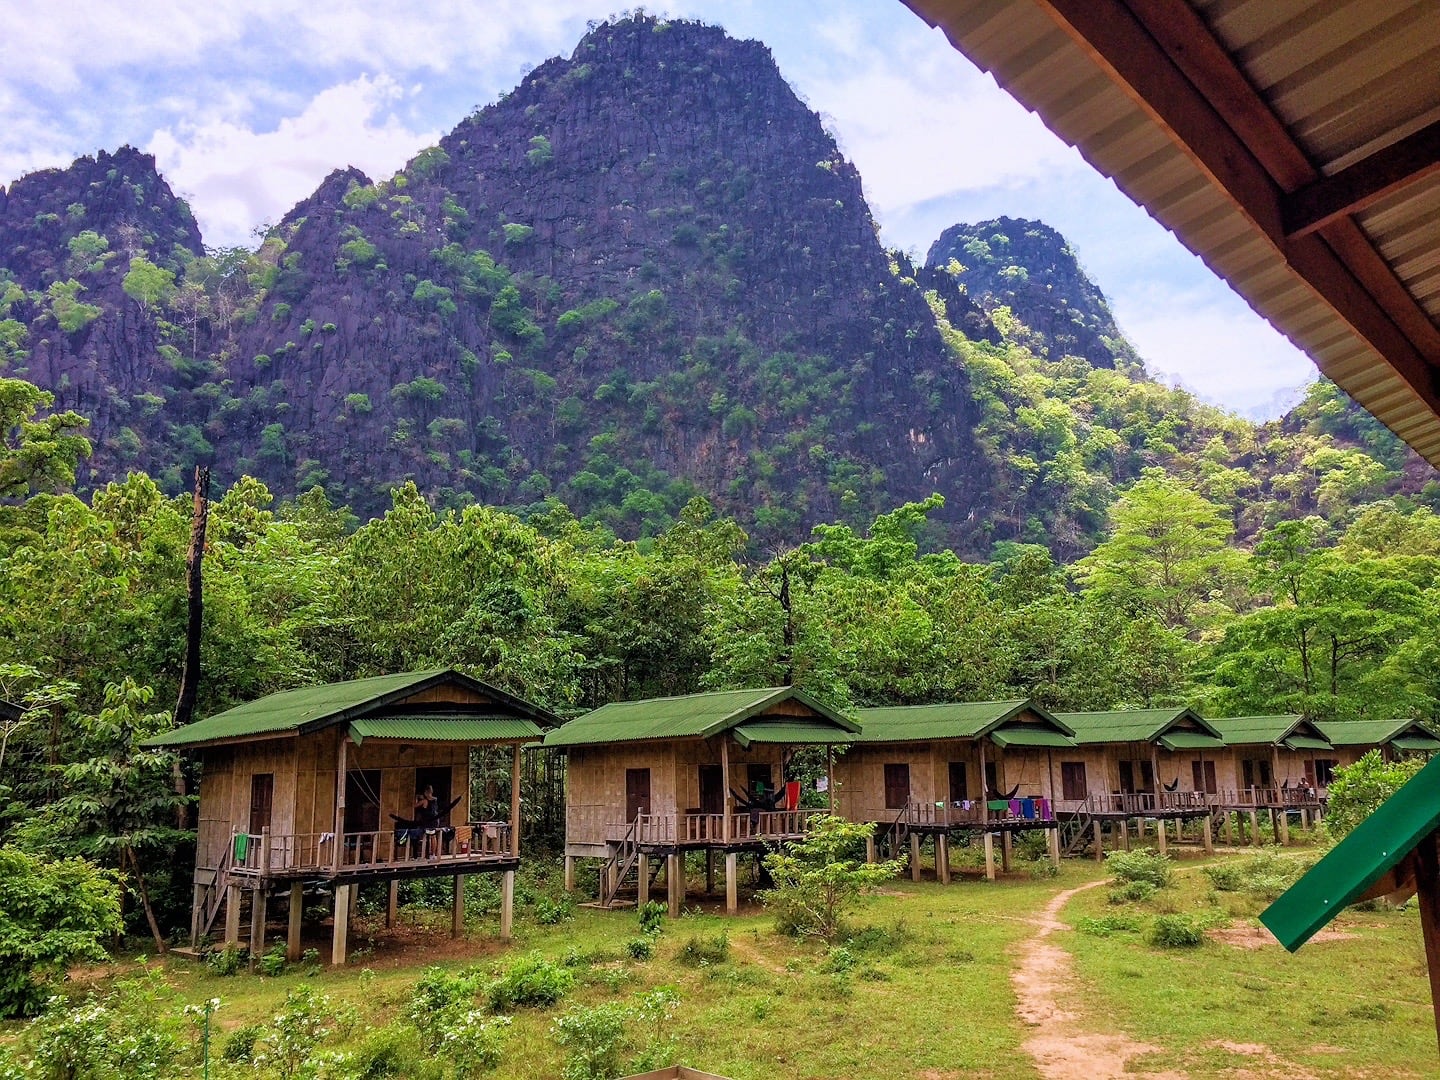 Green Climbers Home in Laos